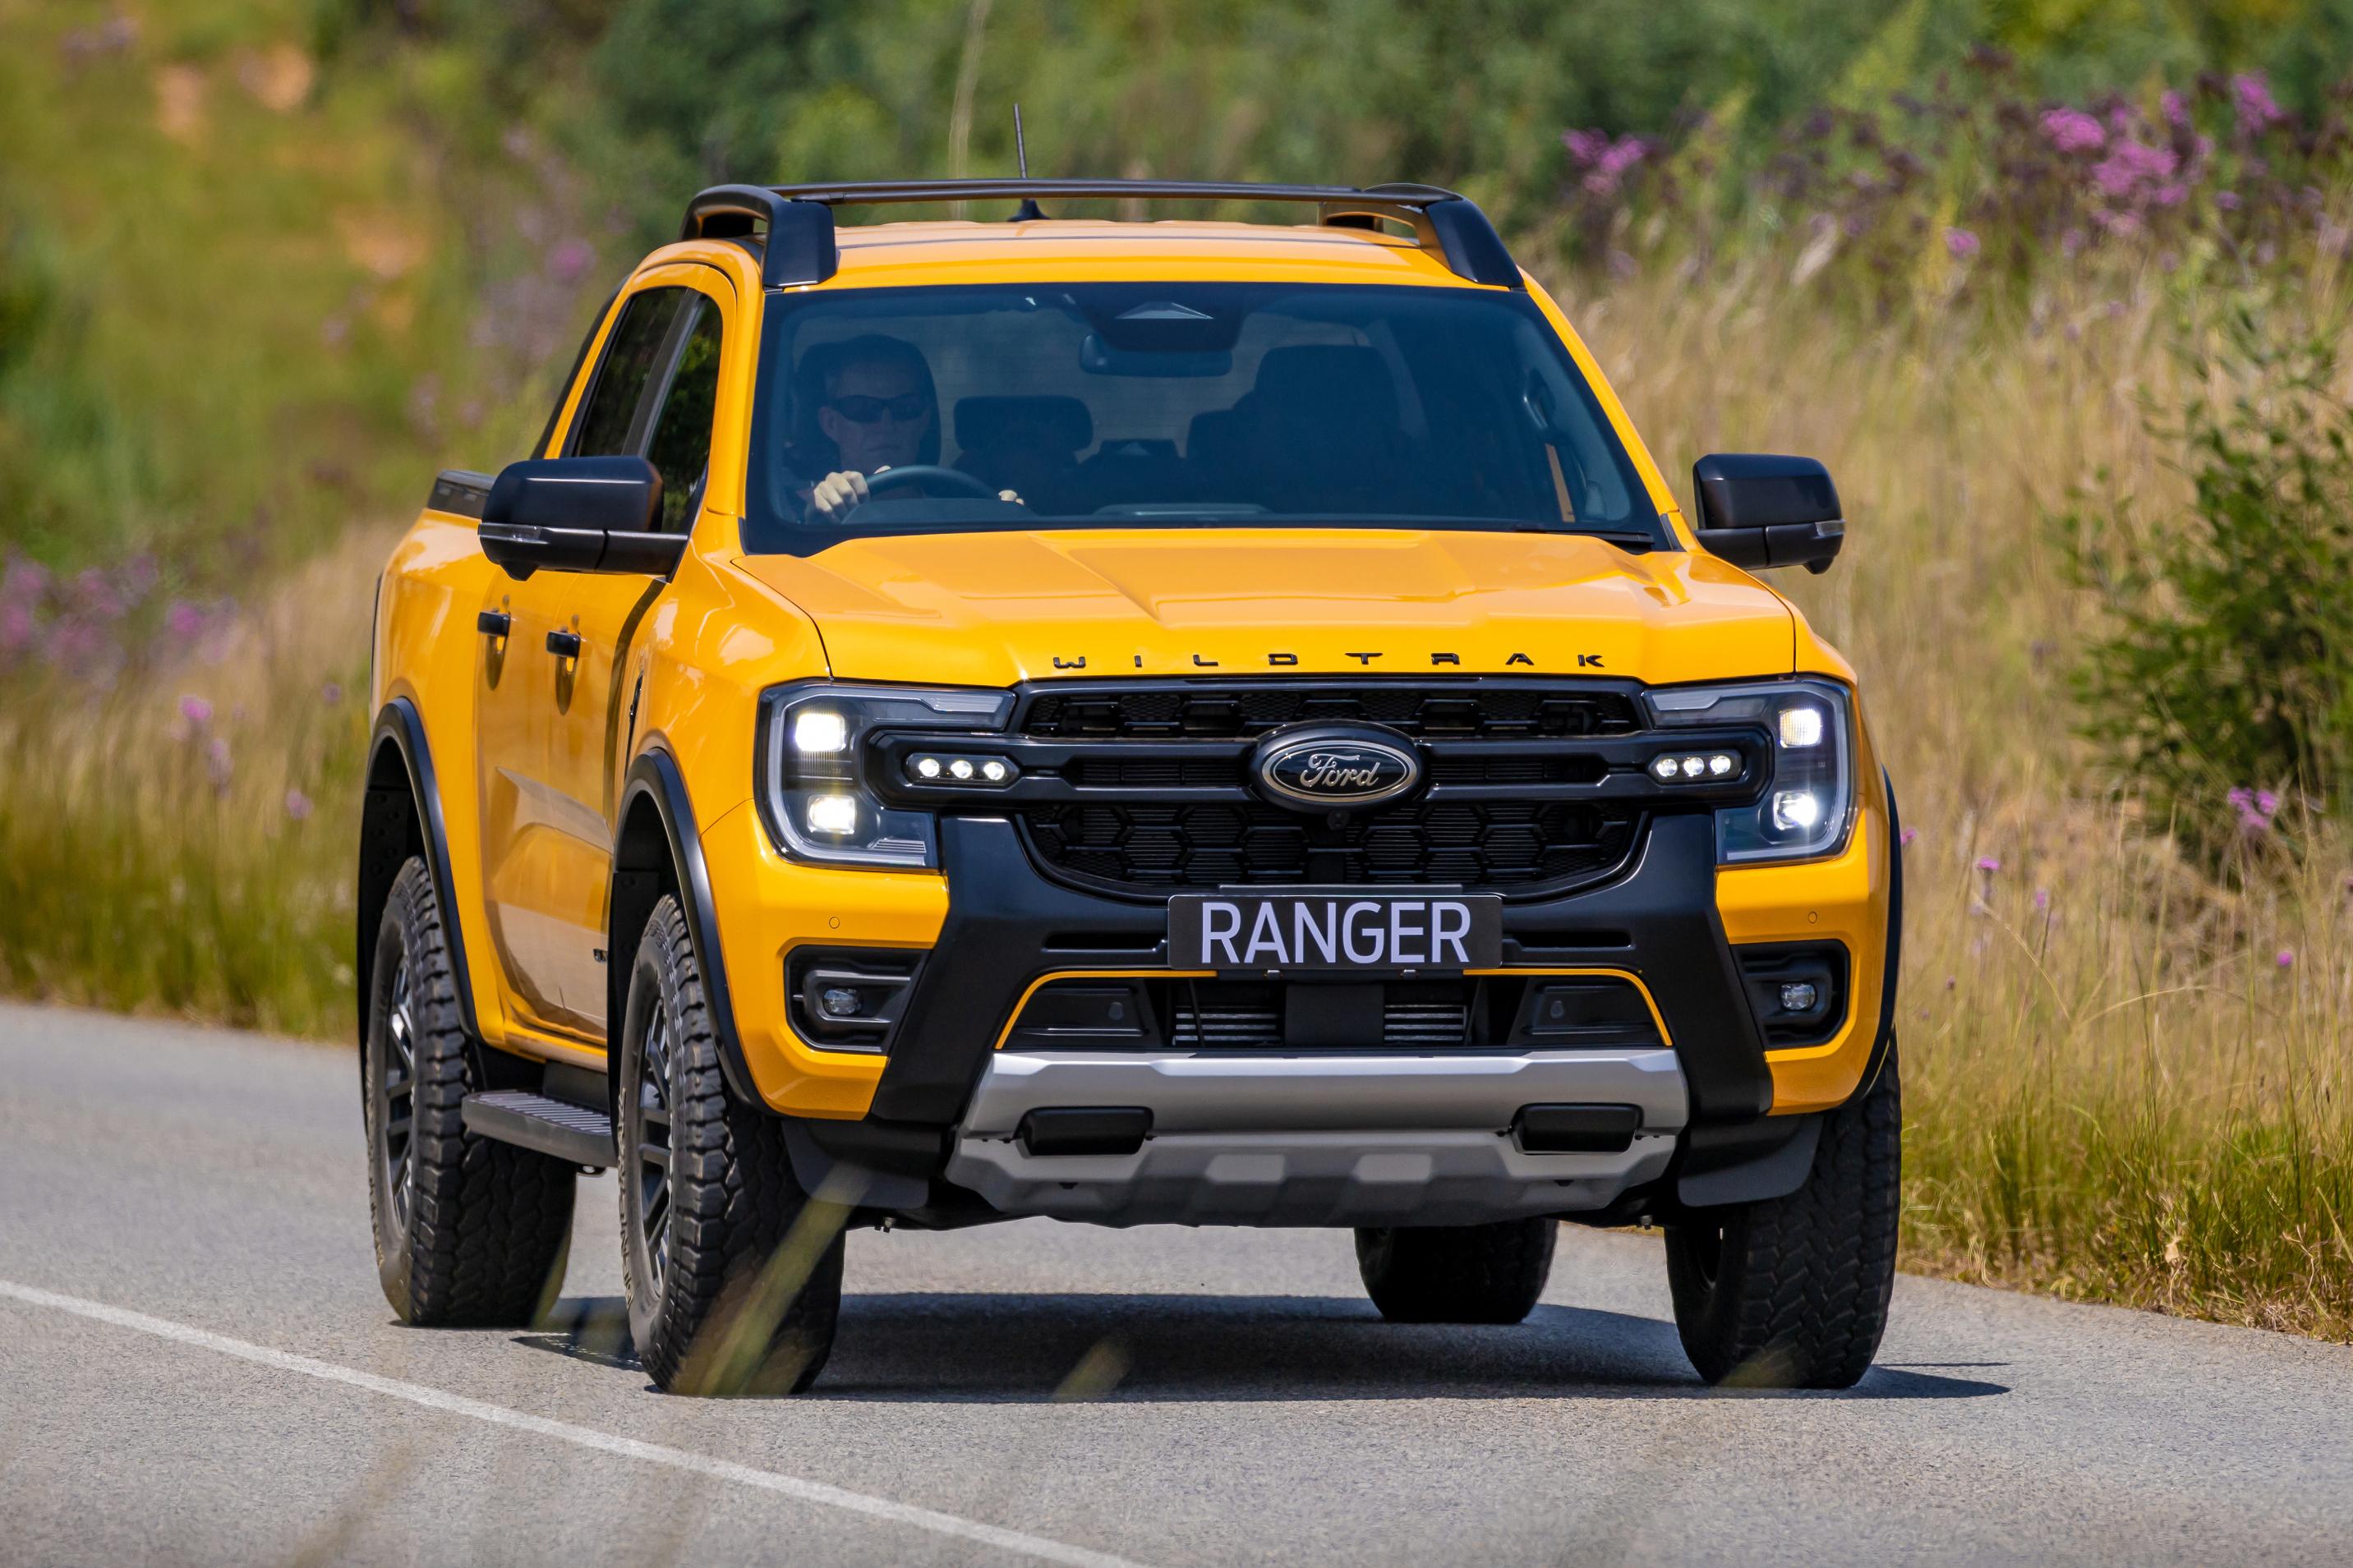 Ford drops new Ranger variant with wider track, lifted Bilstein